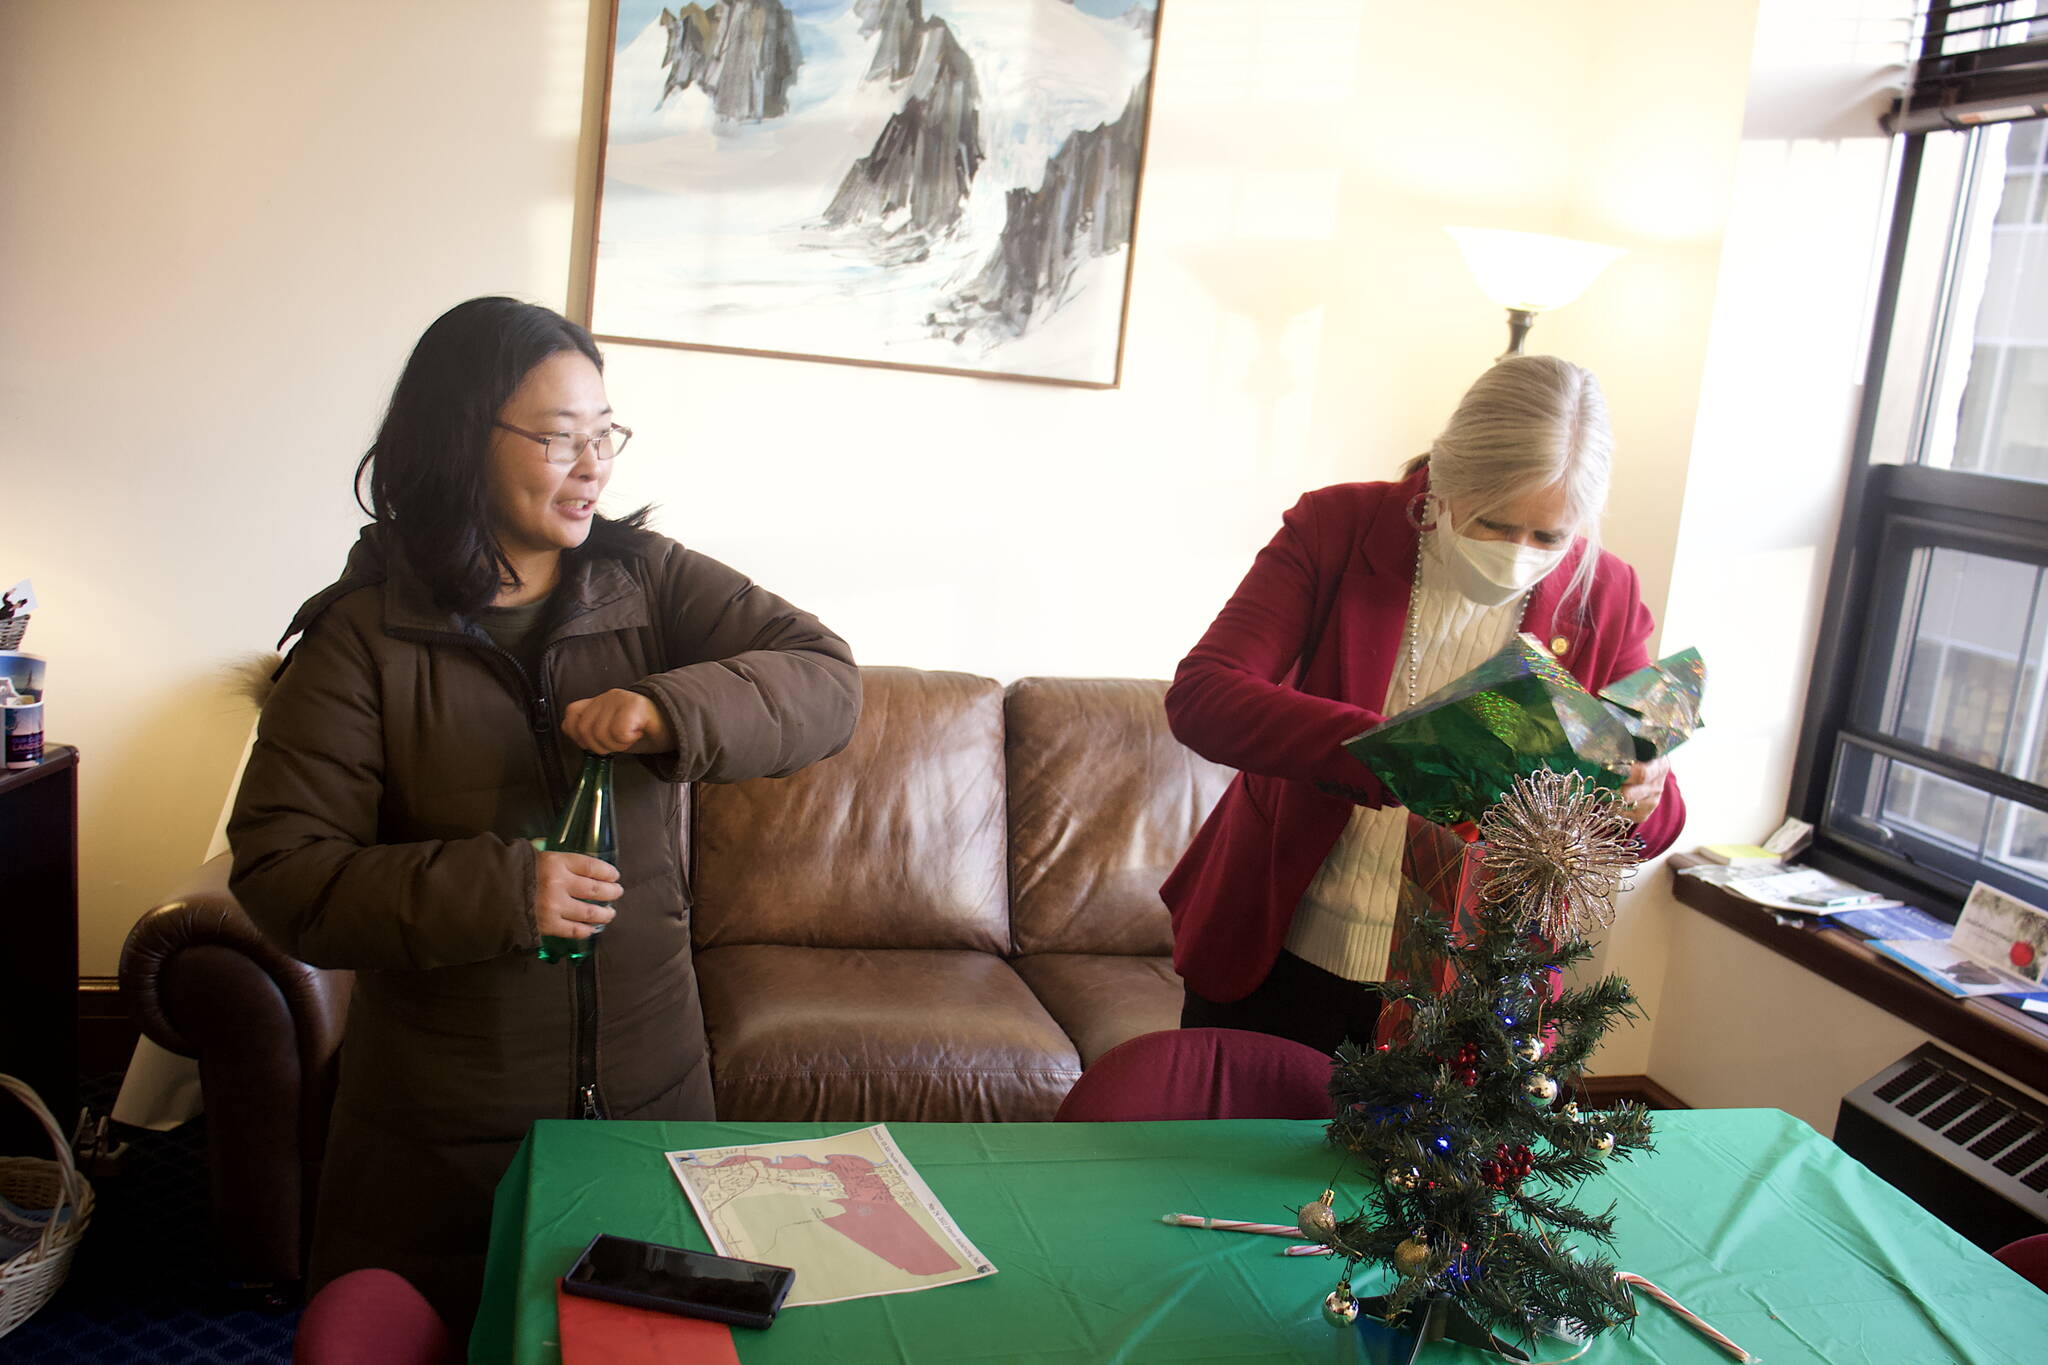 Katie Botz, left, gives state Rep. Andi Story of Juneau a present during an open house hosted by the local legislative delegation in December at the Alaska State Capitol. (Mark Sabbatini / Juneau Empire)